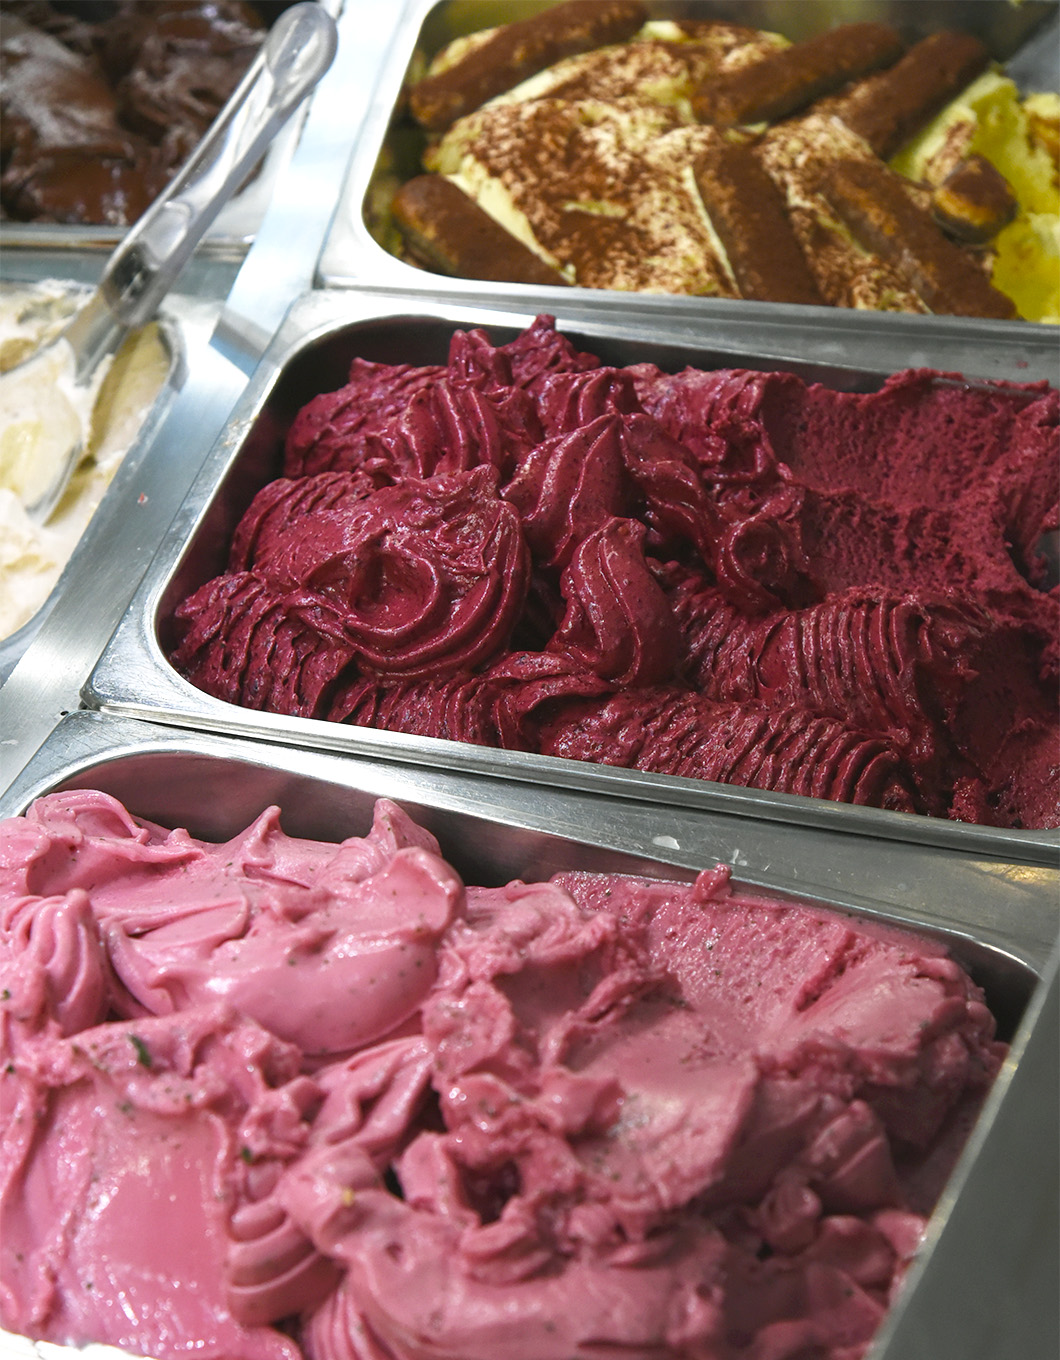 Display of red fruit flavours at the gelateria B.ICE in Florence